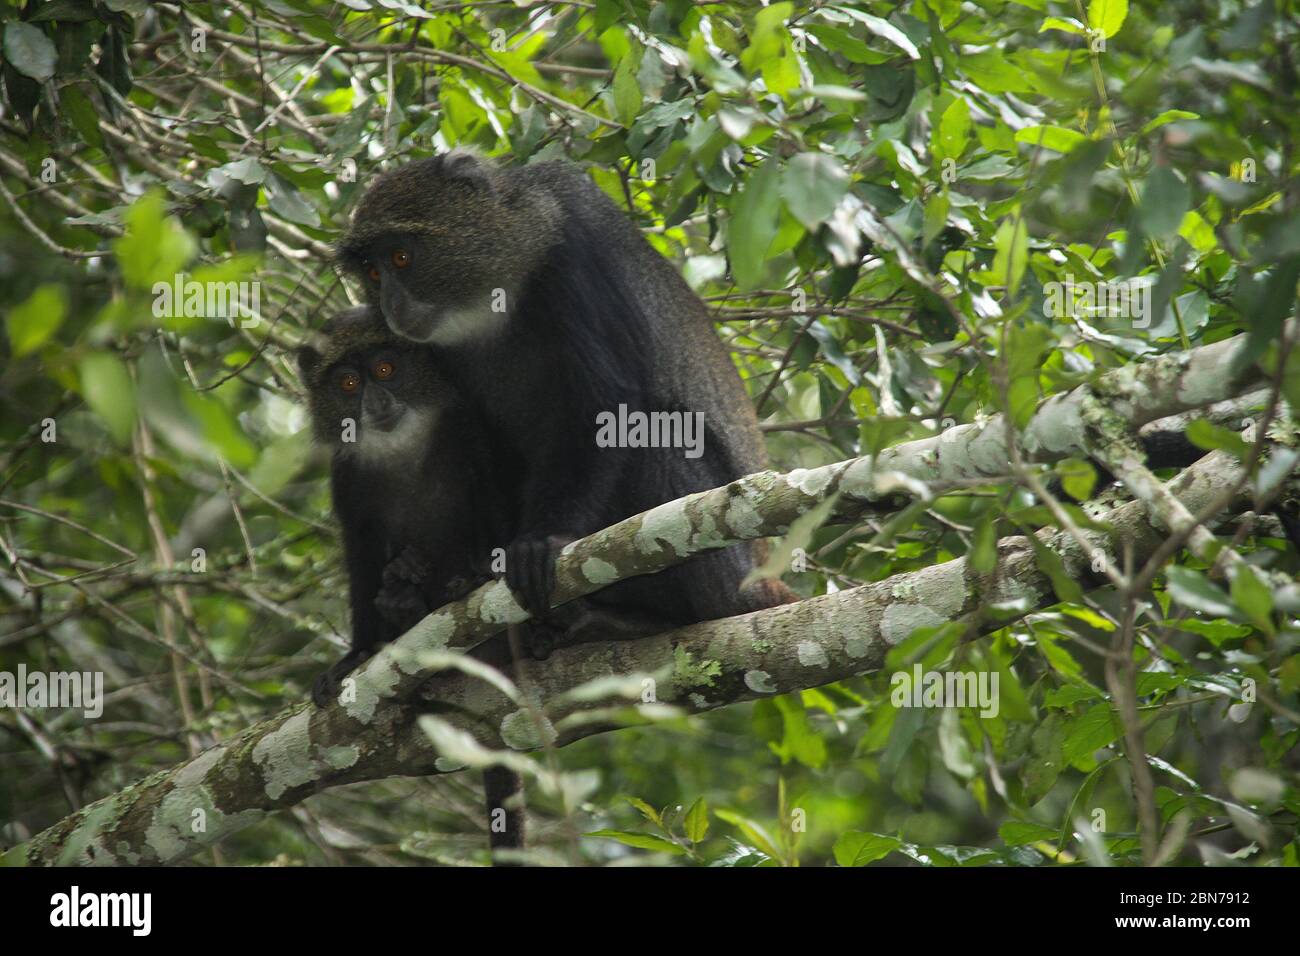 Female Sykes' monkey (Cercopithecus albogularis), also known as the white-throated monkey or Samango monkey, in a tree. This monkey lives in troops, d Stock Photo